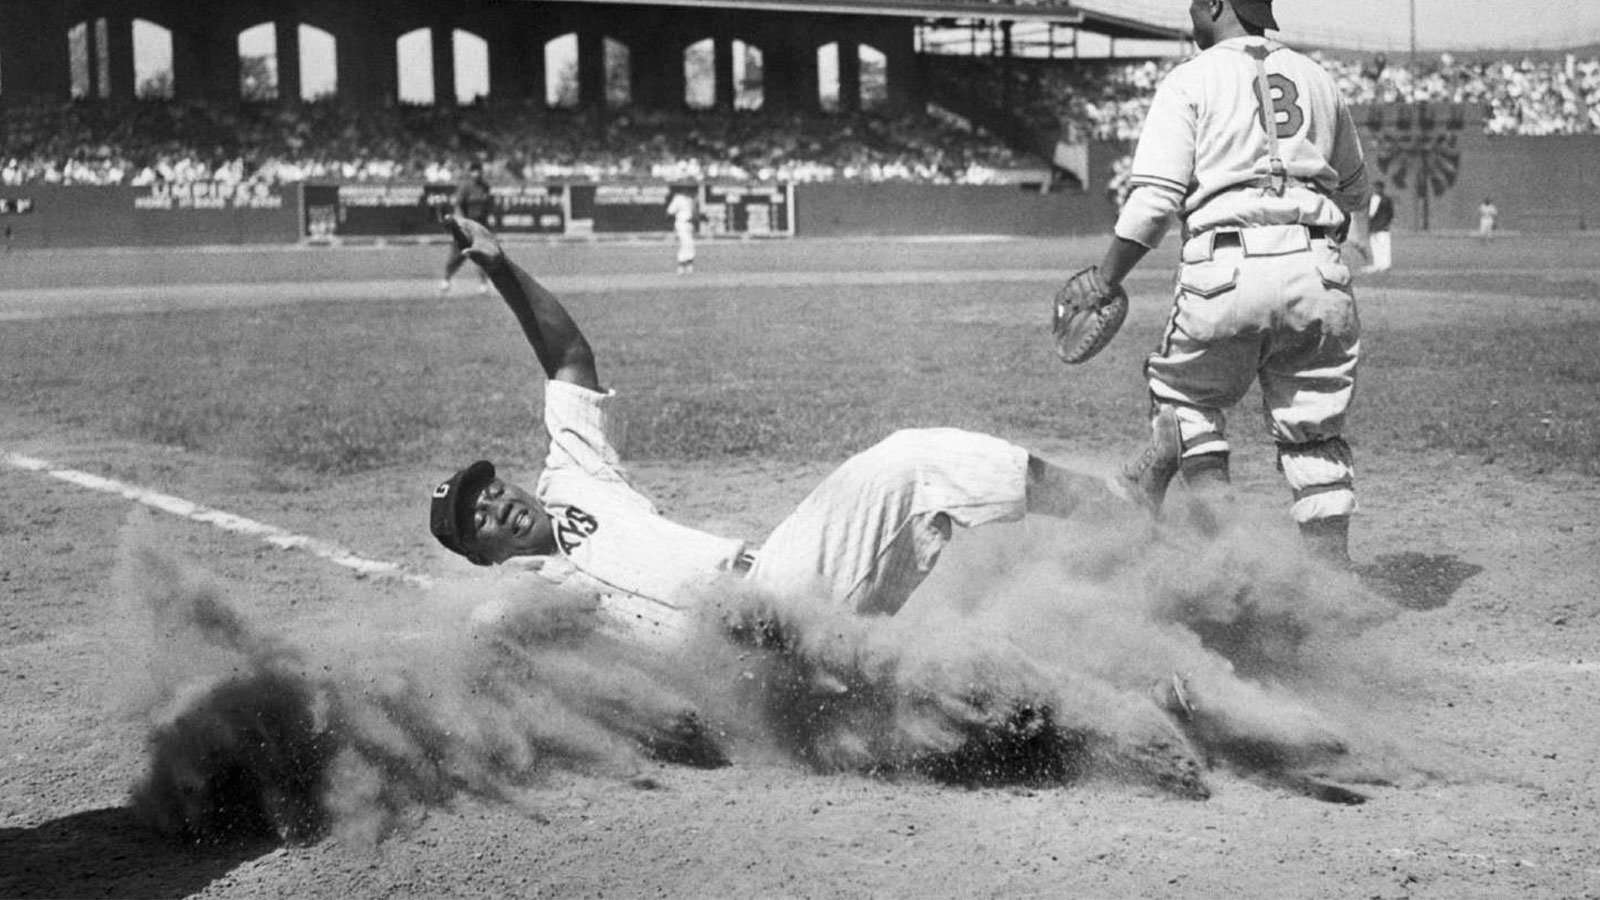 Counting the Negro League records is about more than numbers